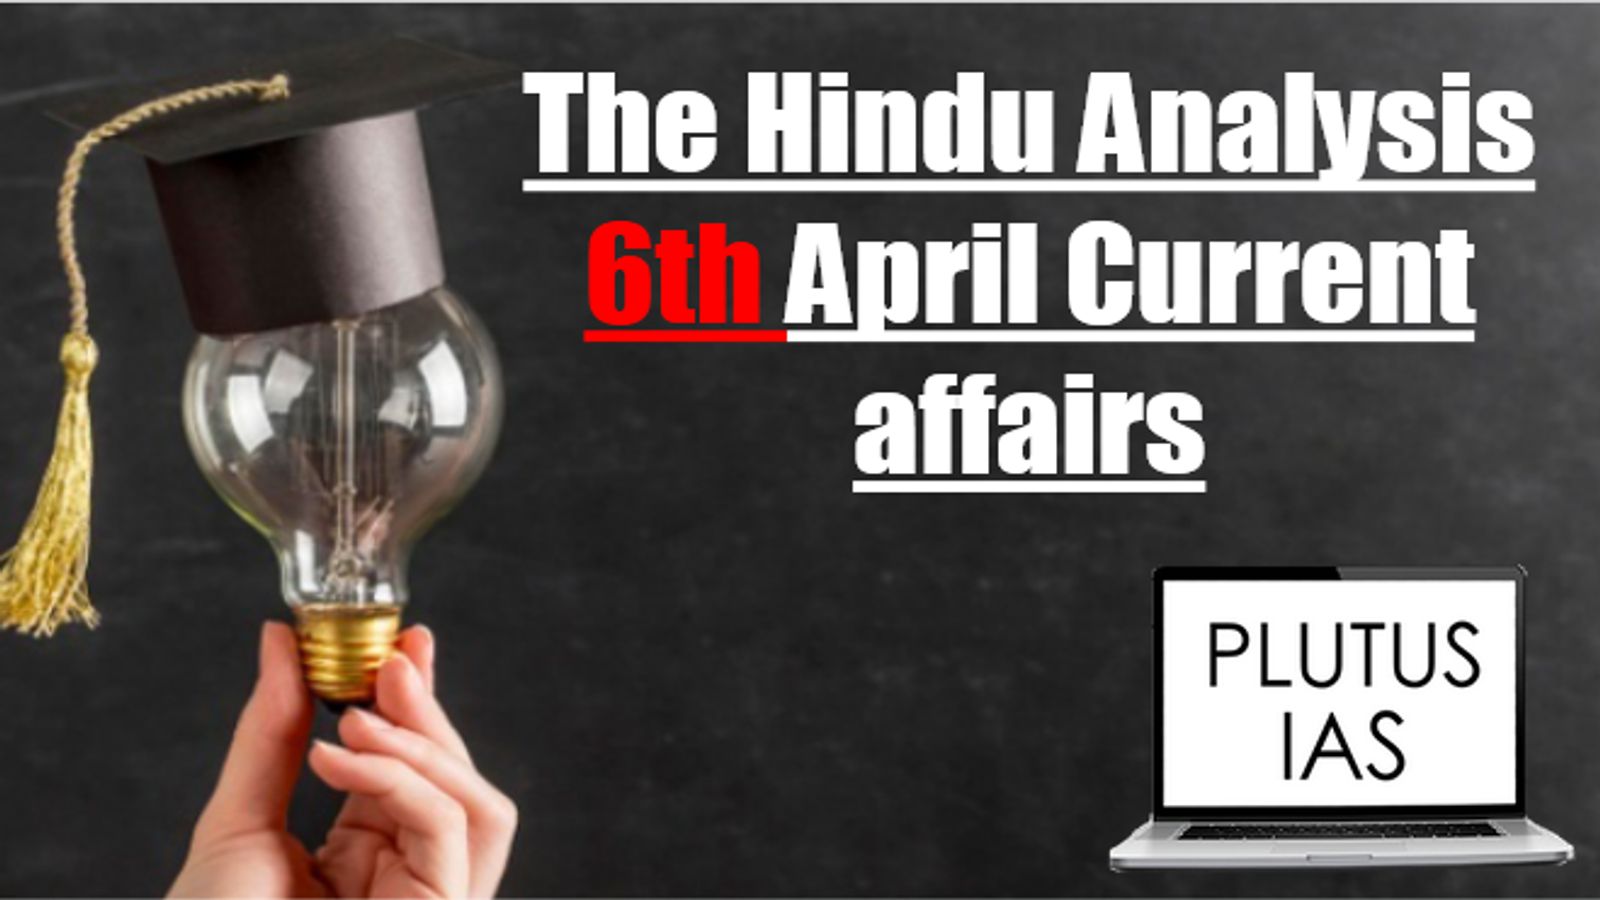 Today Current Affairs 6th April